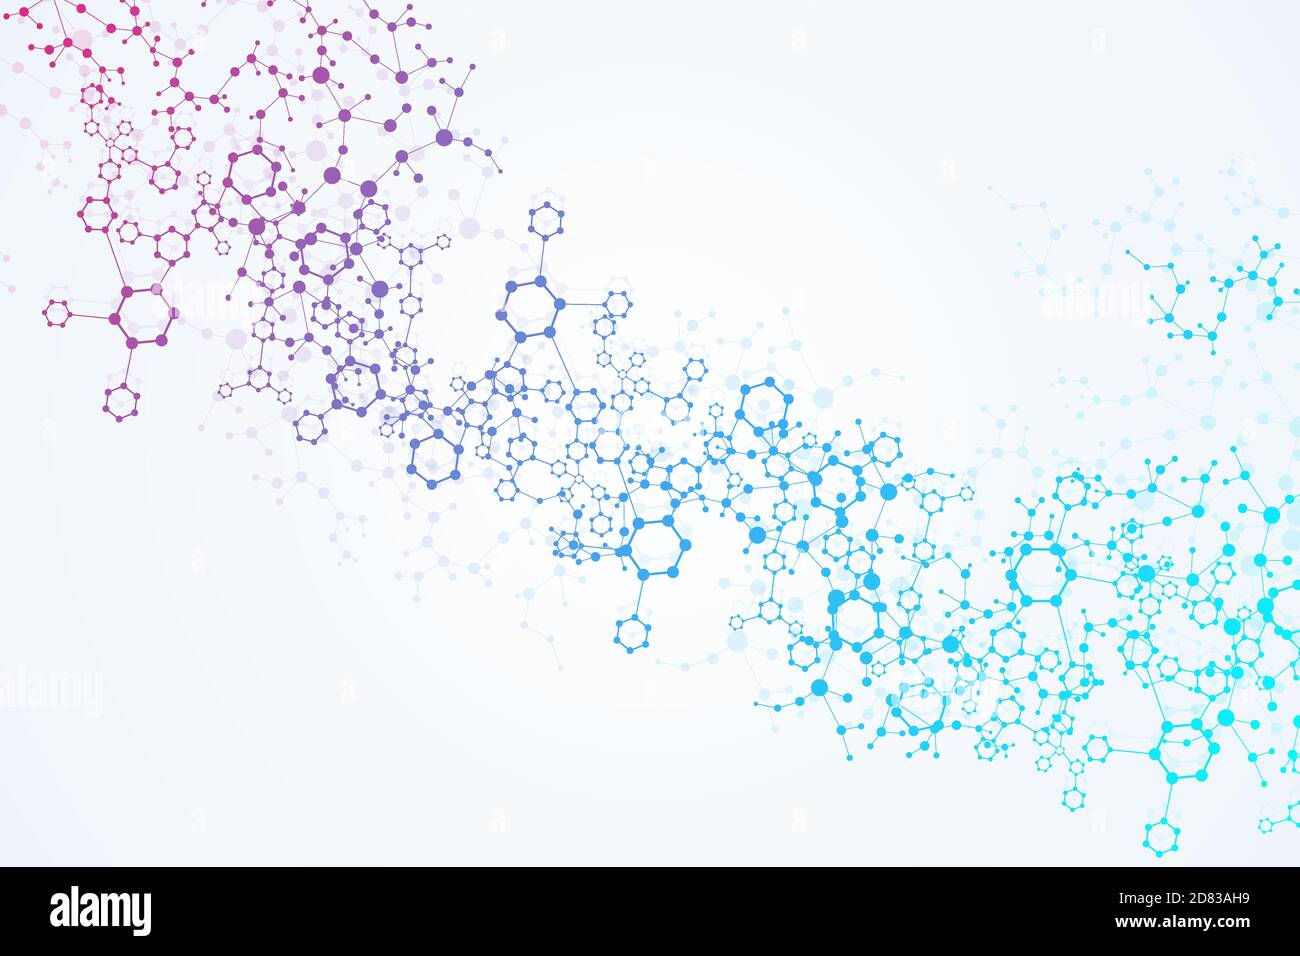 Science network pattern, connecting lines and dots. Technology hexagons structure or molecular connect elements. Stock Vector